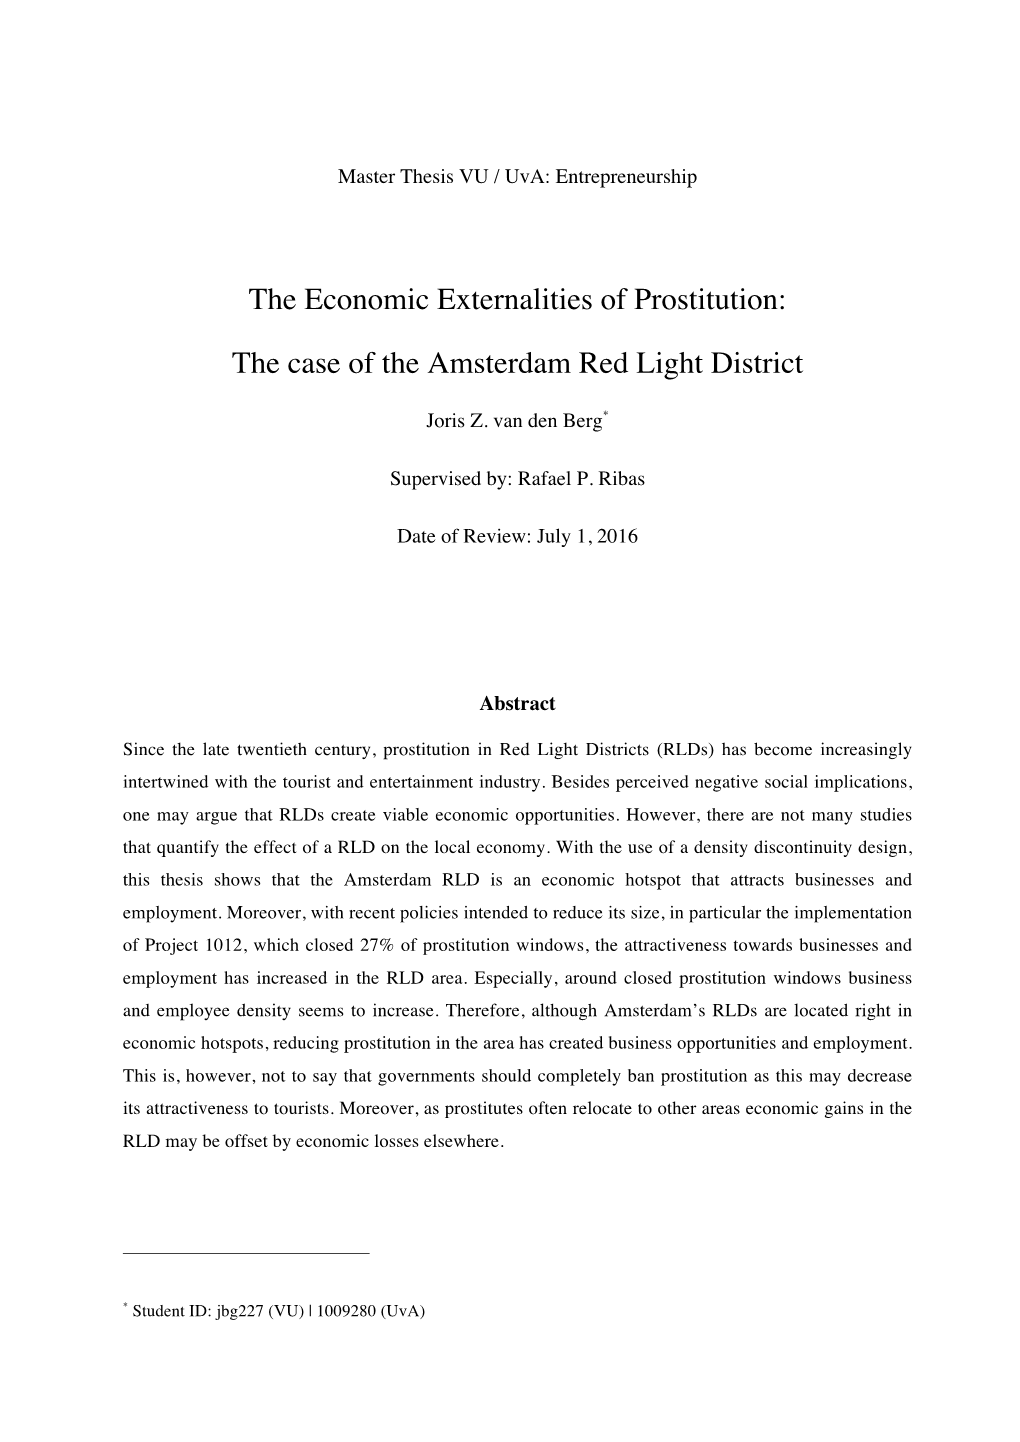 The Economic Externalities of Prostitution